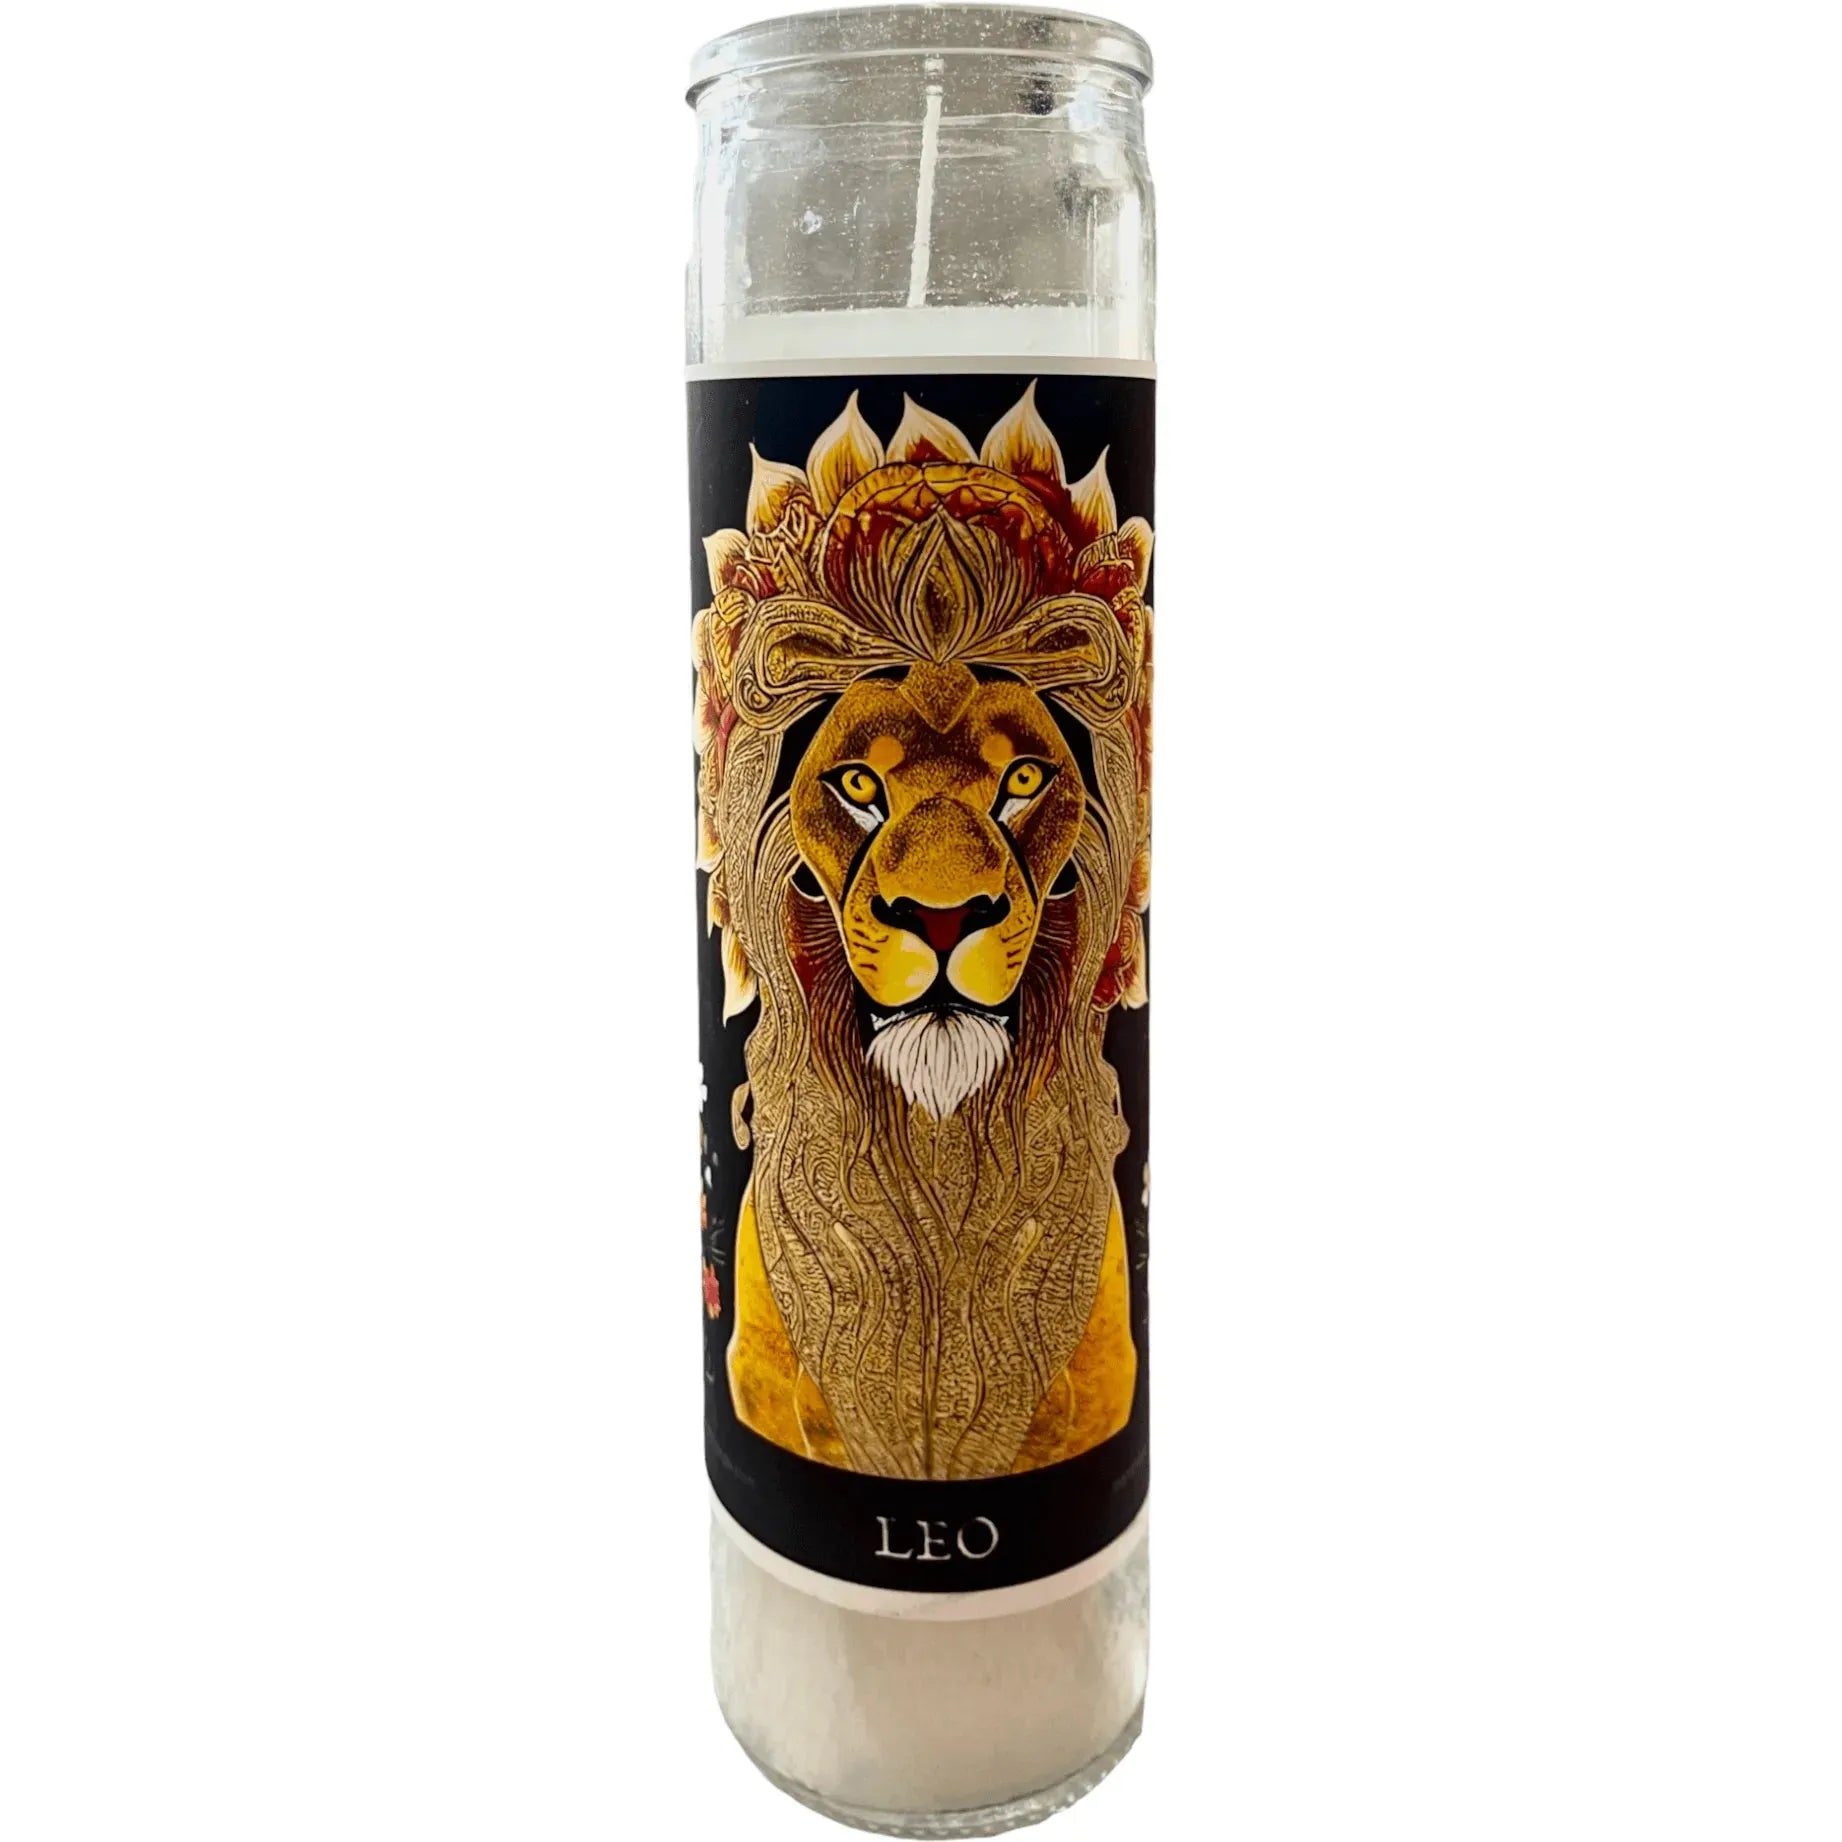 Leo the lion fire sign zodiac astrology altar wiccan celestial prayer candle metaphysical ruled by the sun home decor